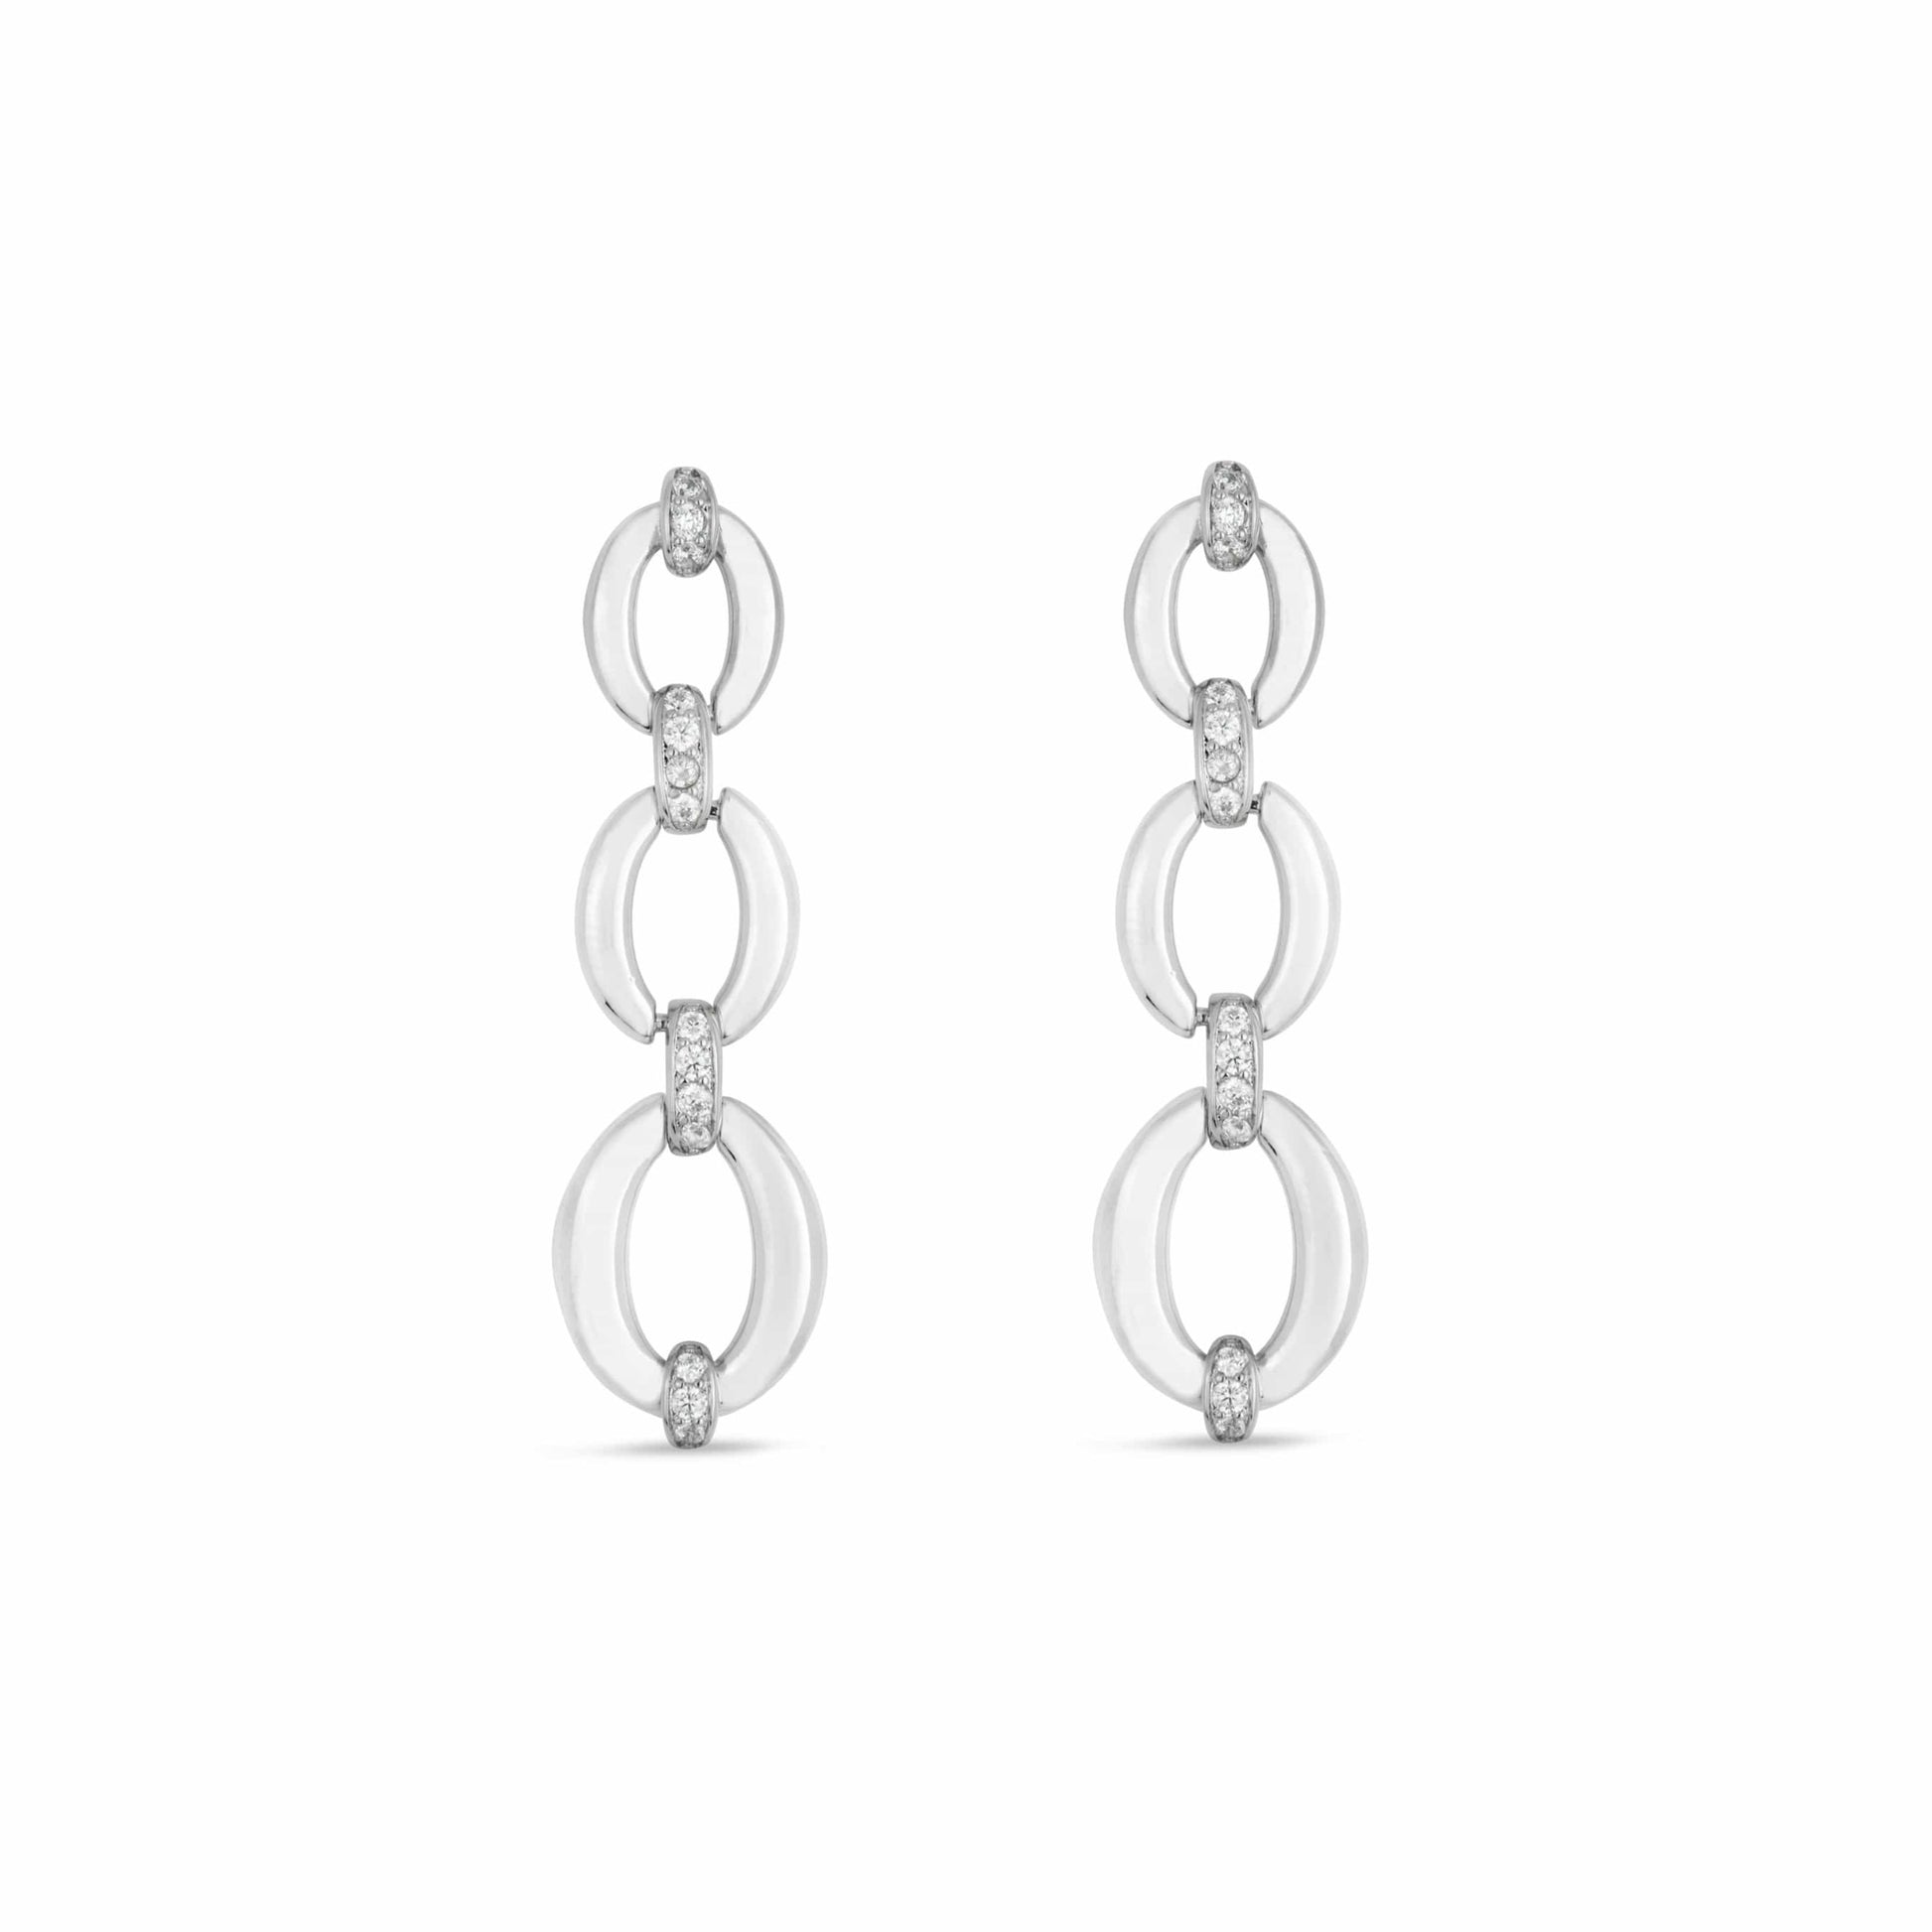 Platinum Drop Earrings with Cubic Zirconia Crystal Details - Love & Lilly Jewellery